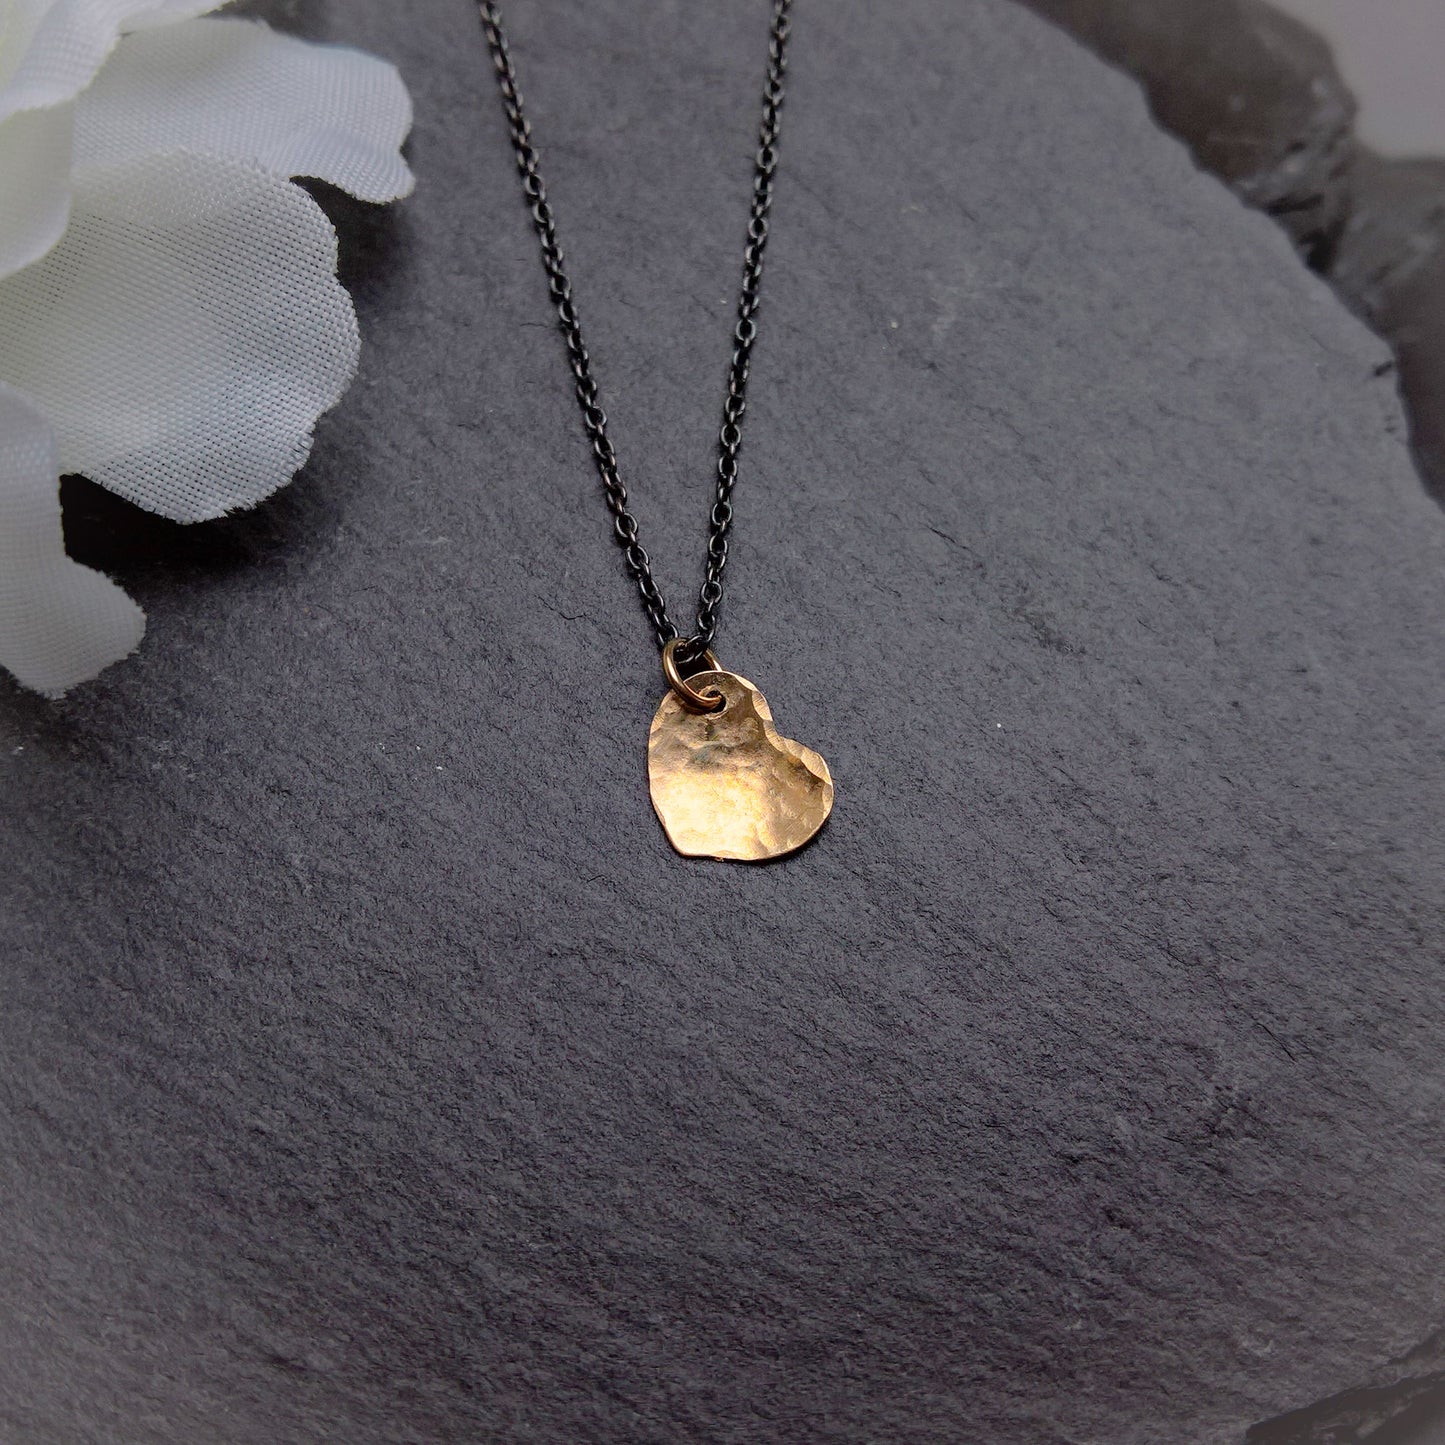 Dainty gold heart pendant on oxidized silver chain necklace